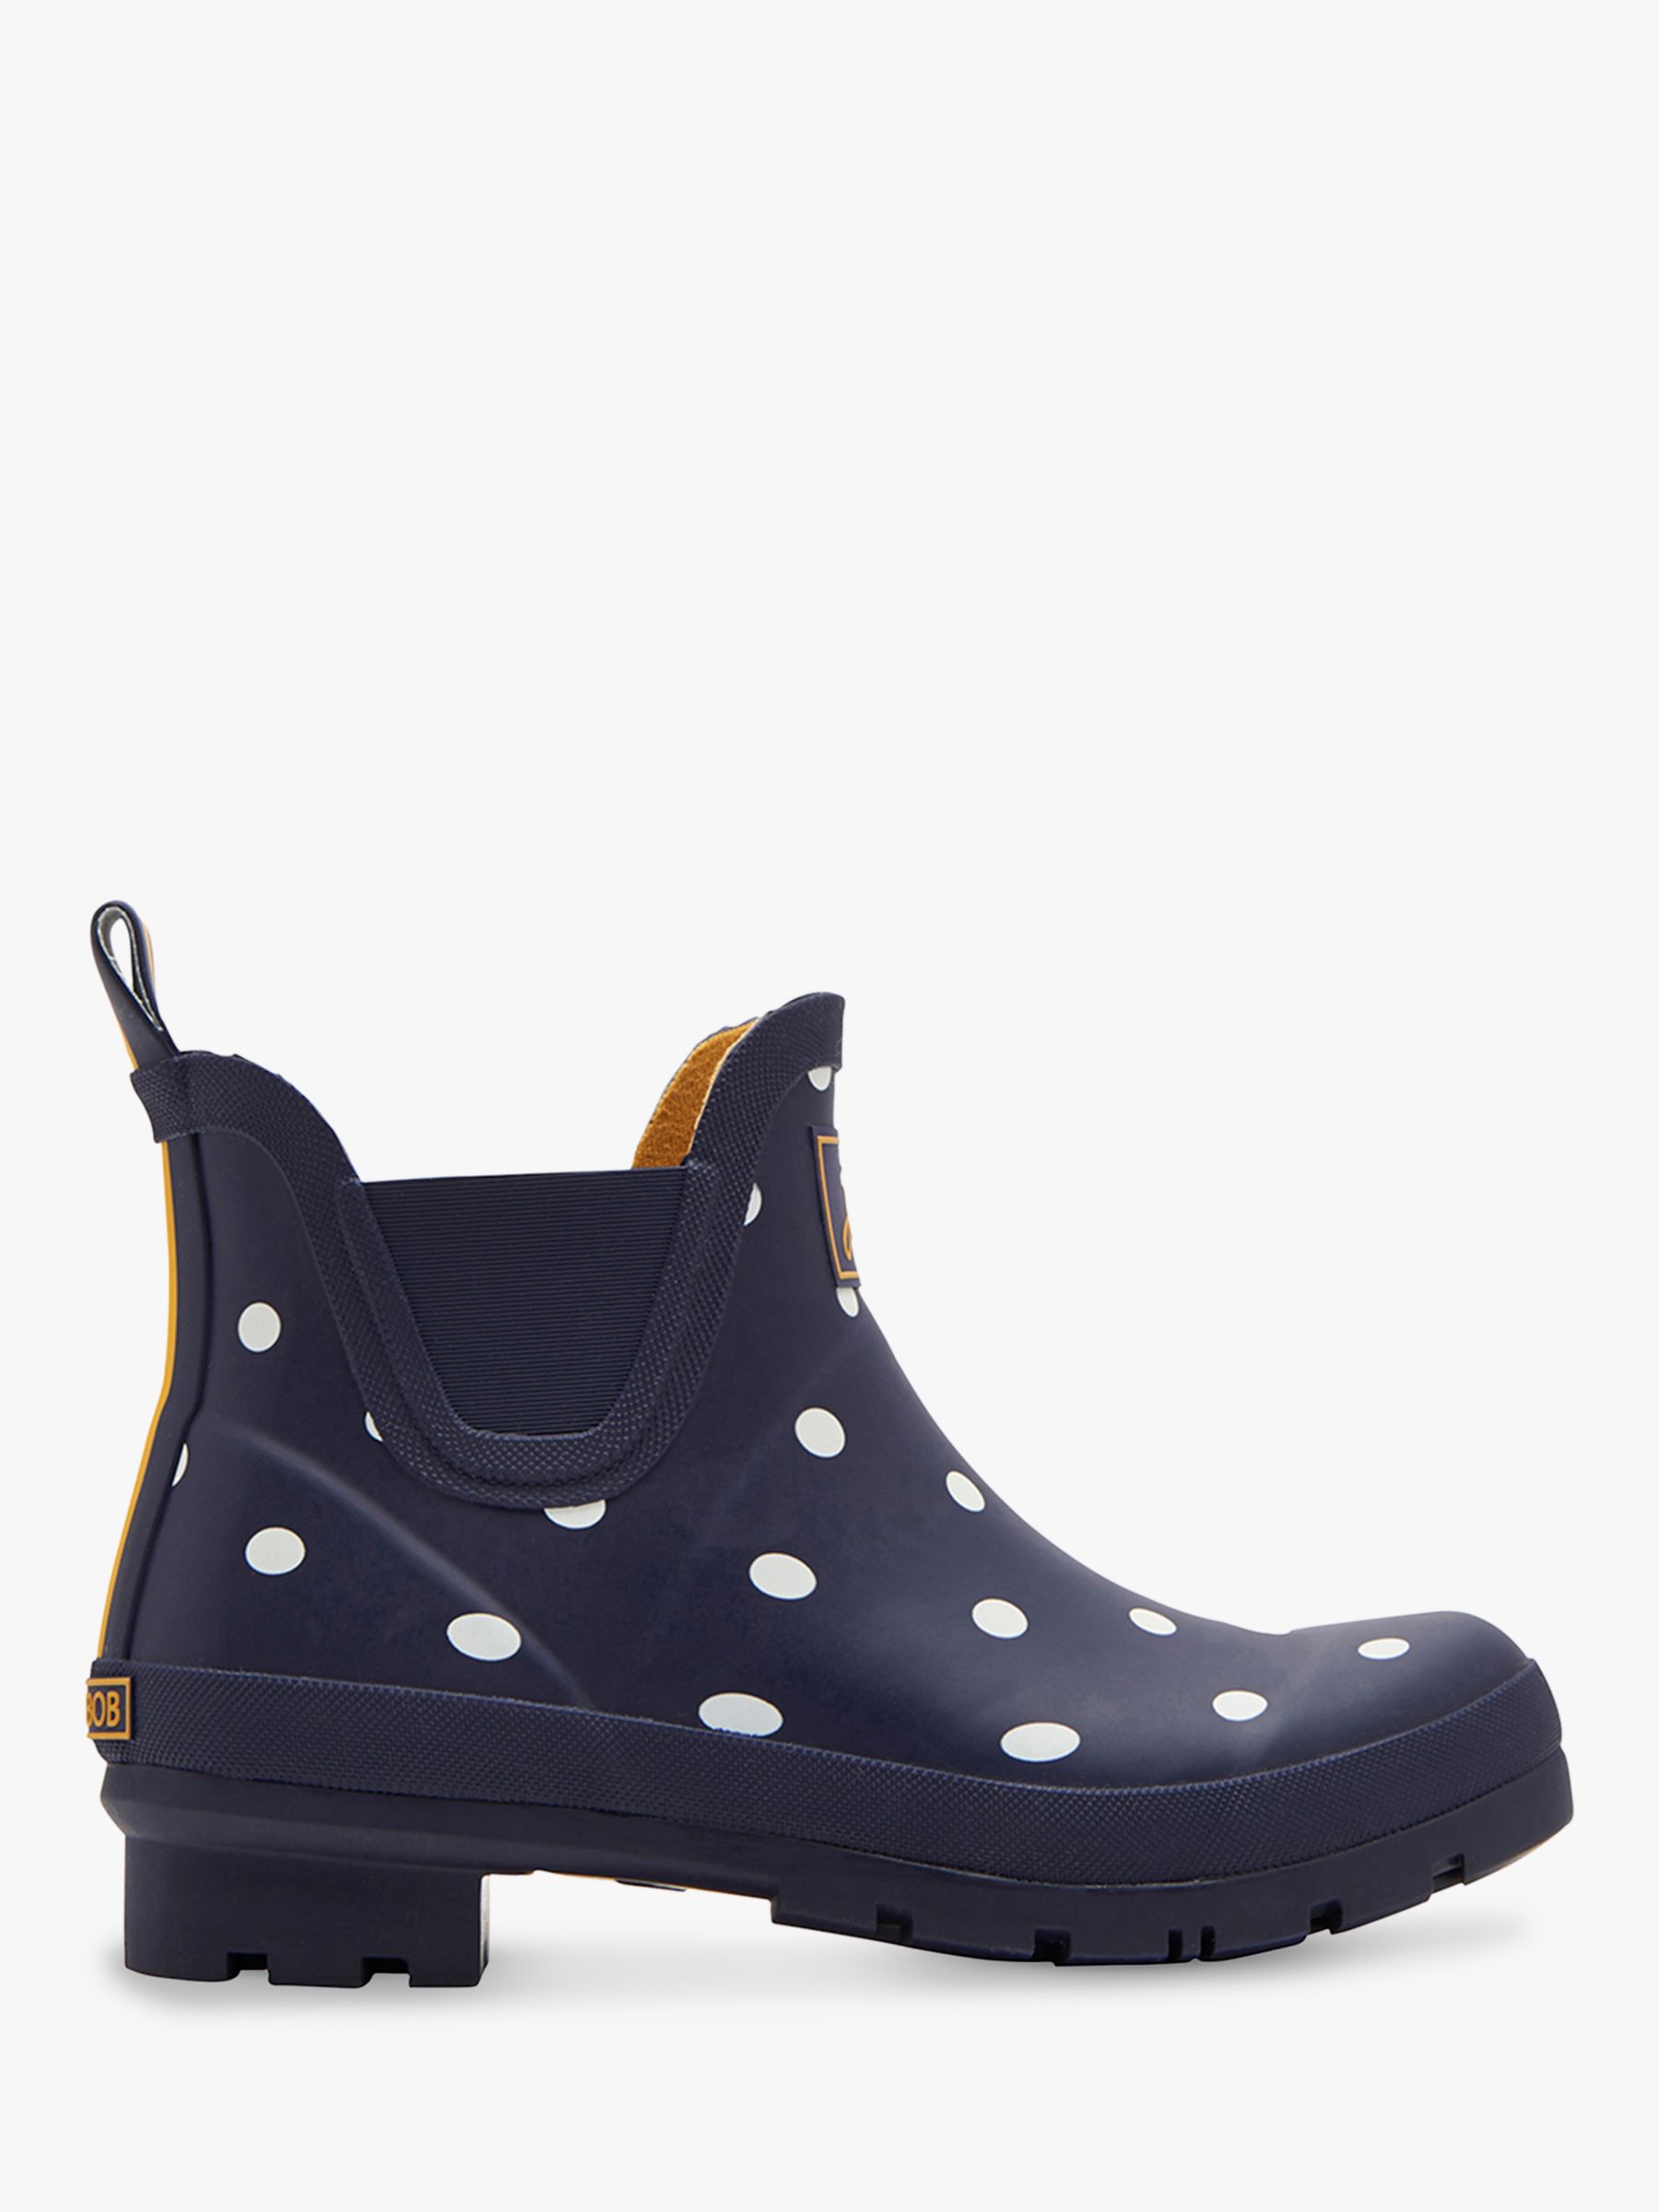 Joules Wellibob Ankle High Wellington Boots, Navy Spot at John Lewis ...